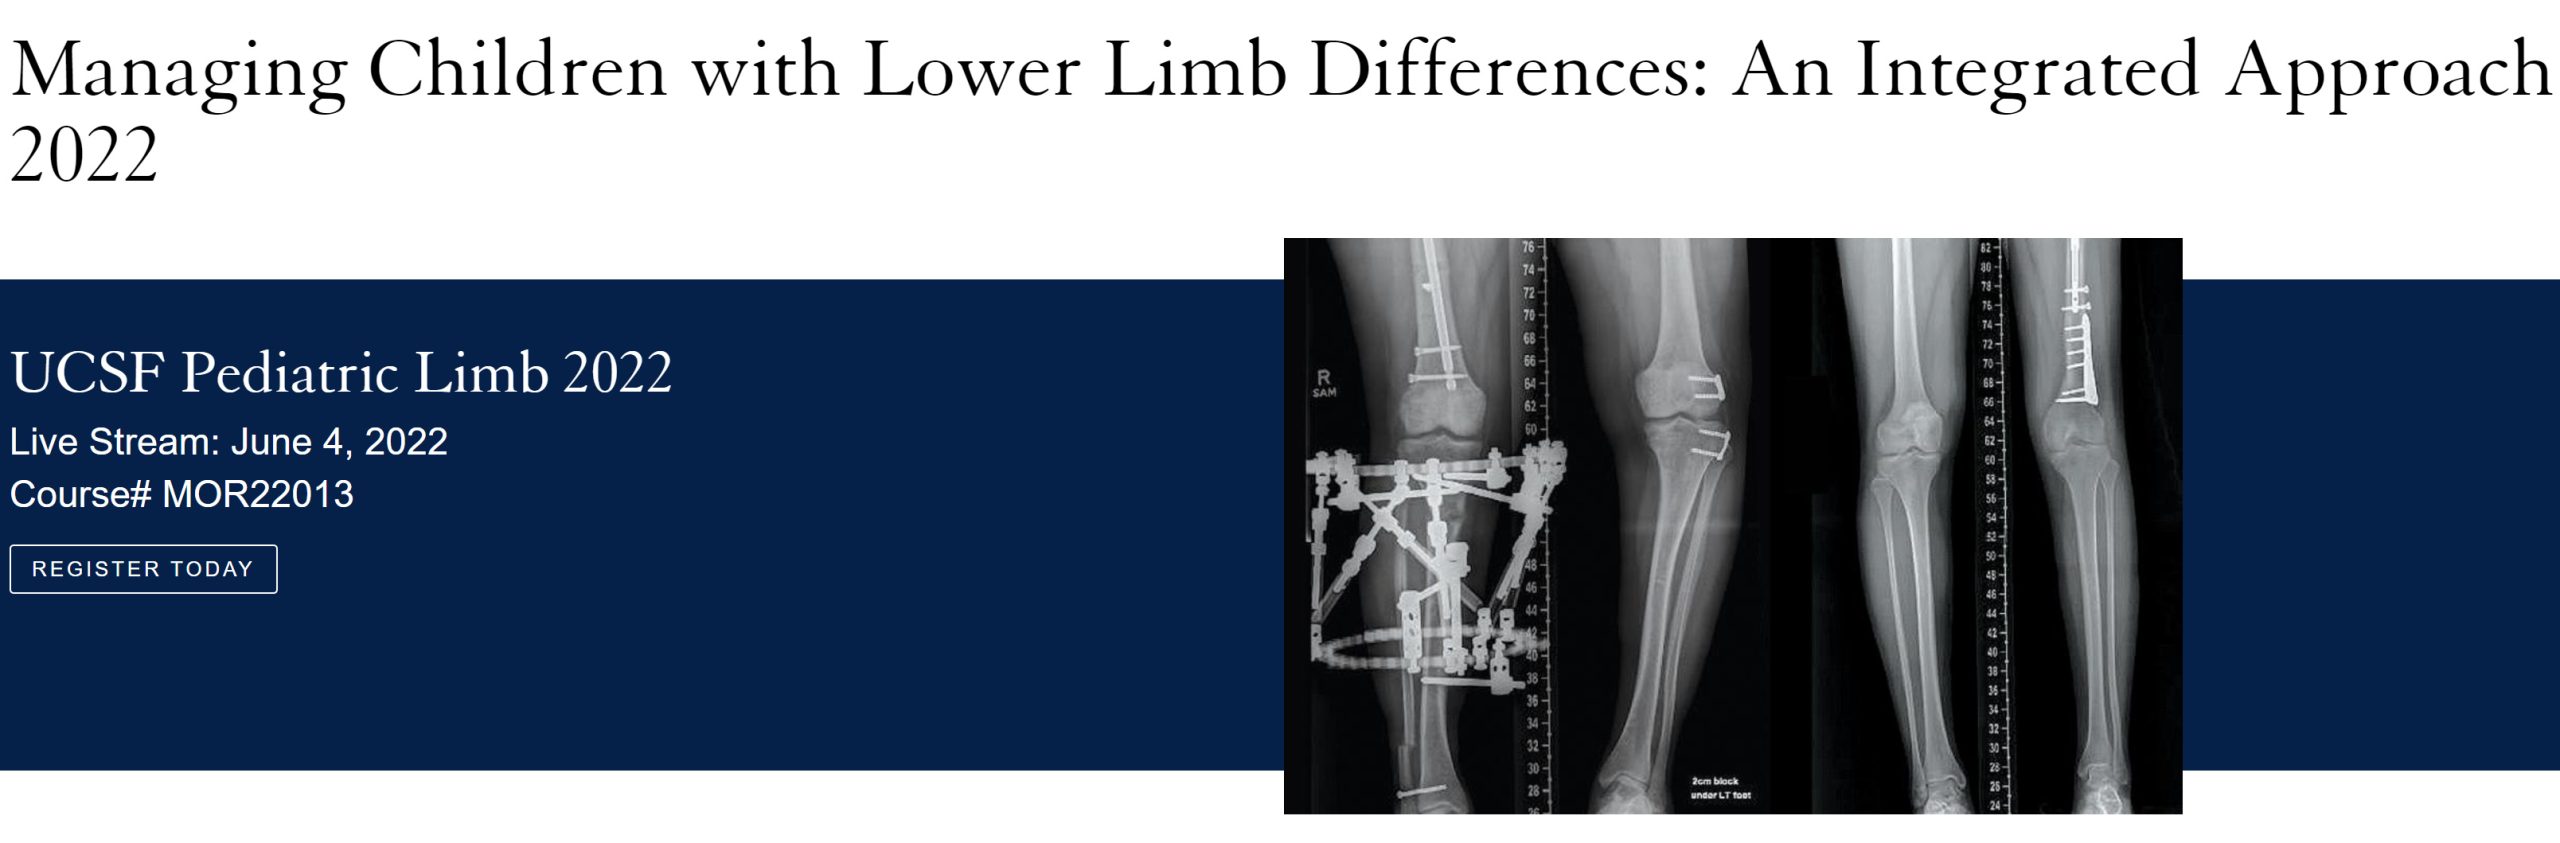 Managing Children with Lower Limb Differences: An Integrated Approach 2022